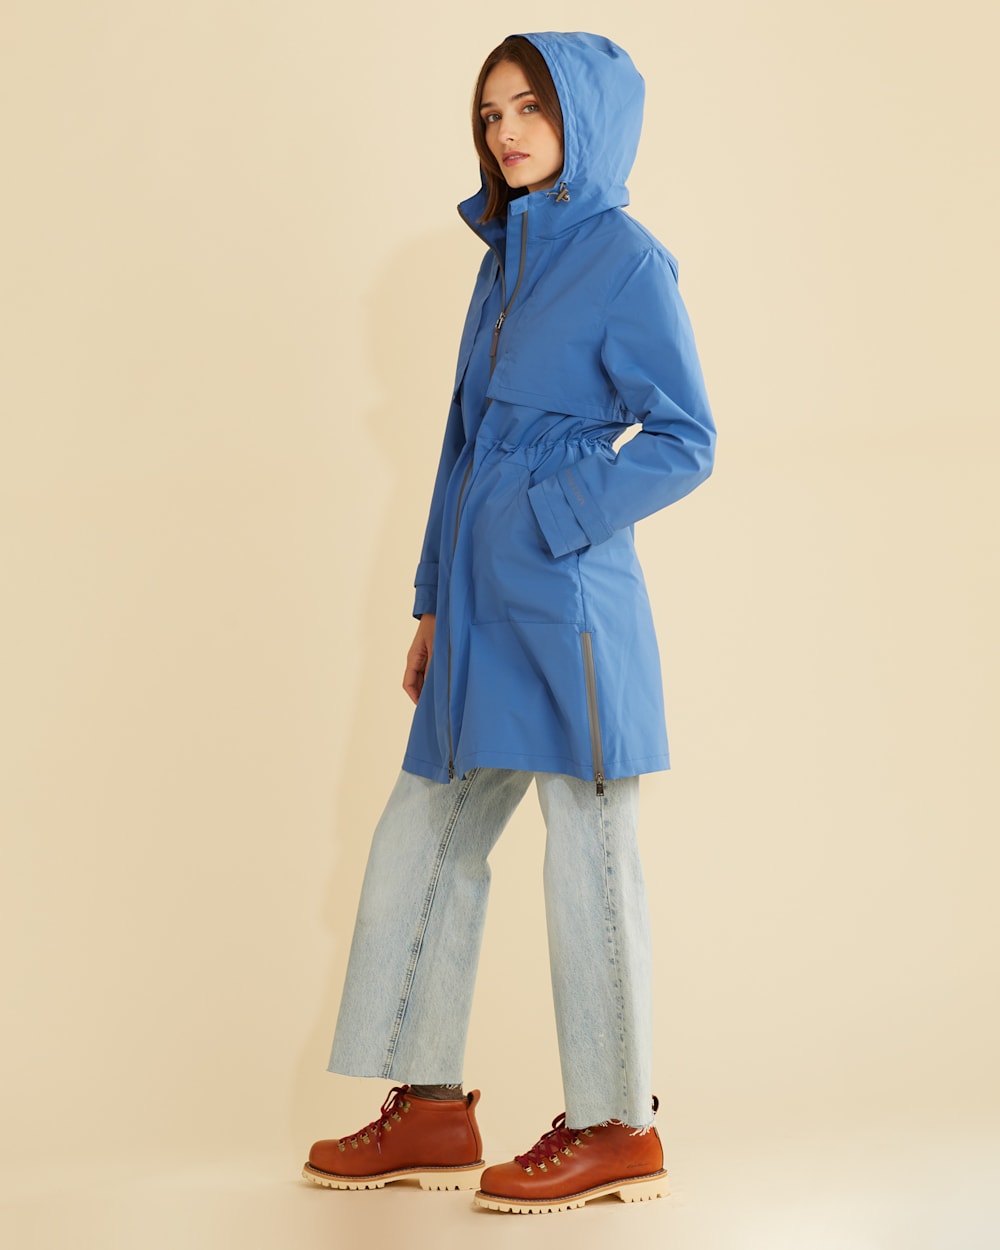 ALTERNATE VIEW OF WOMEN'S PACIFICA MINI RIPSTOP TRENCH IN MARINE BLUE image number 4